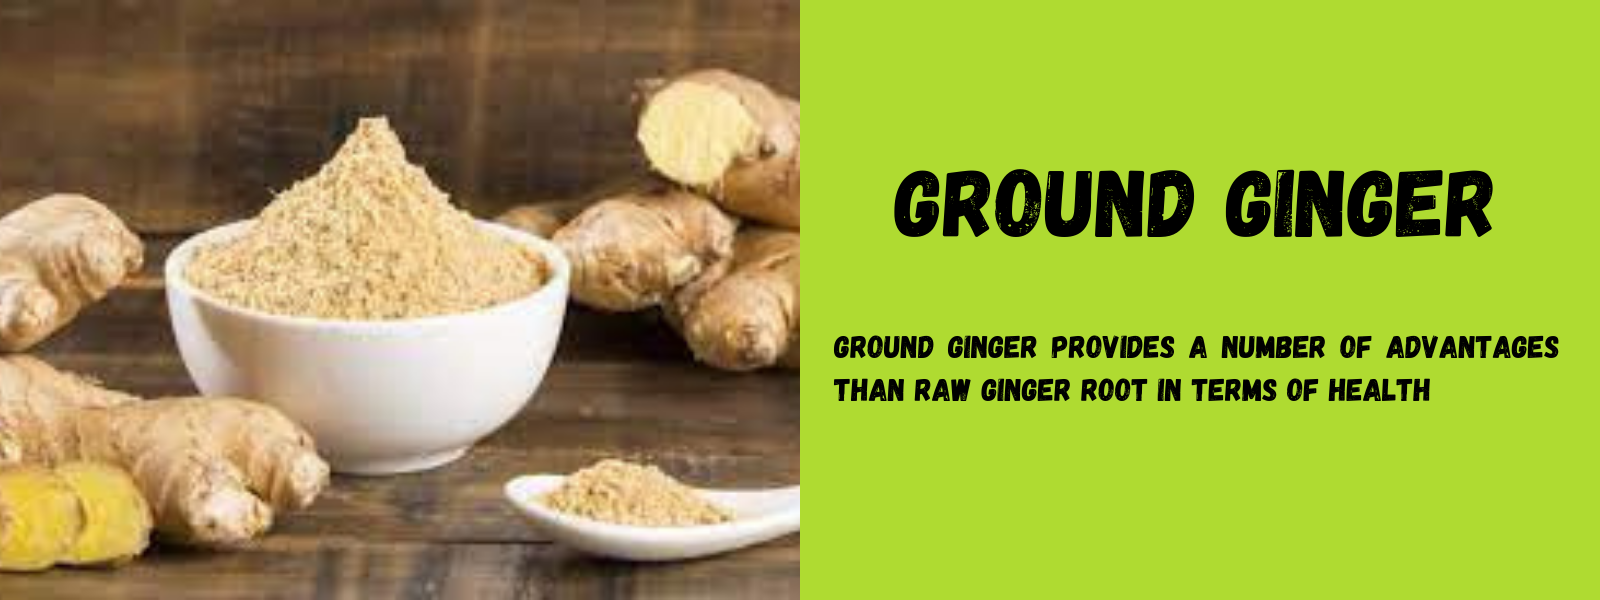 Ground Ginger - Health Benefits, Uses and Important Facts